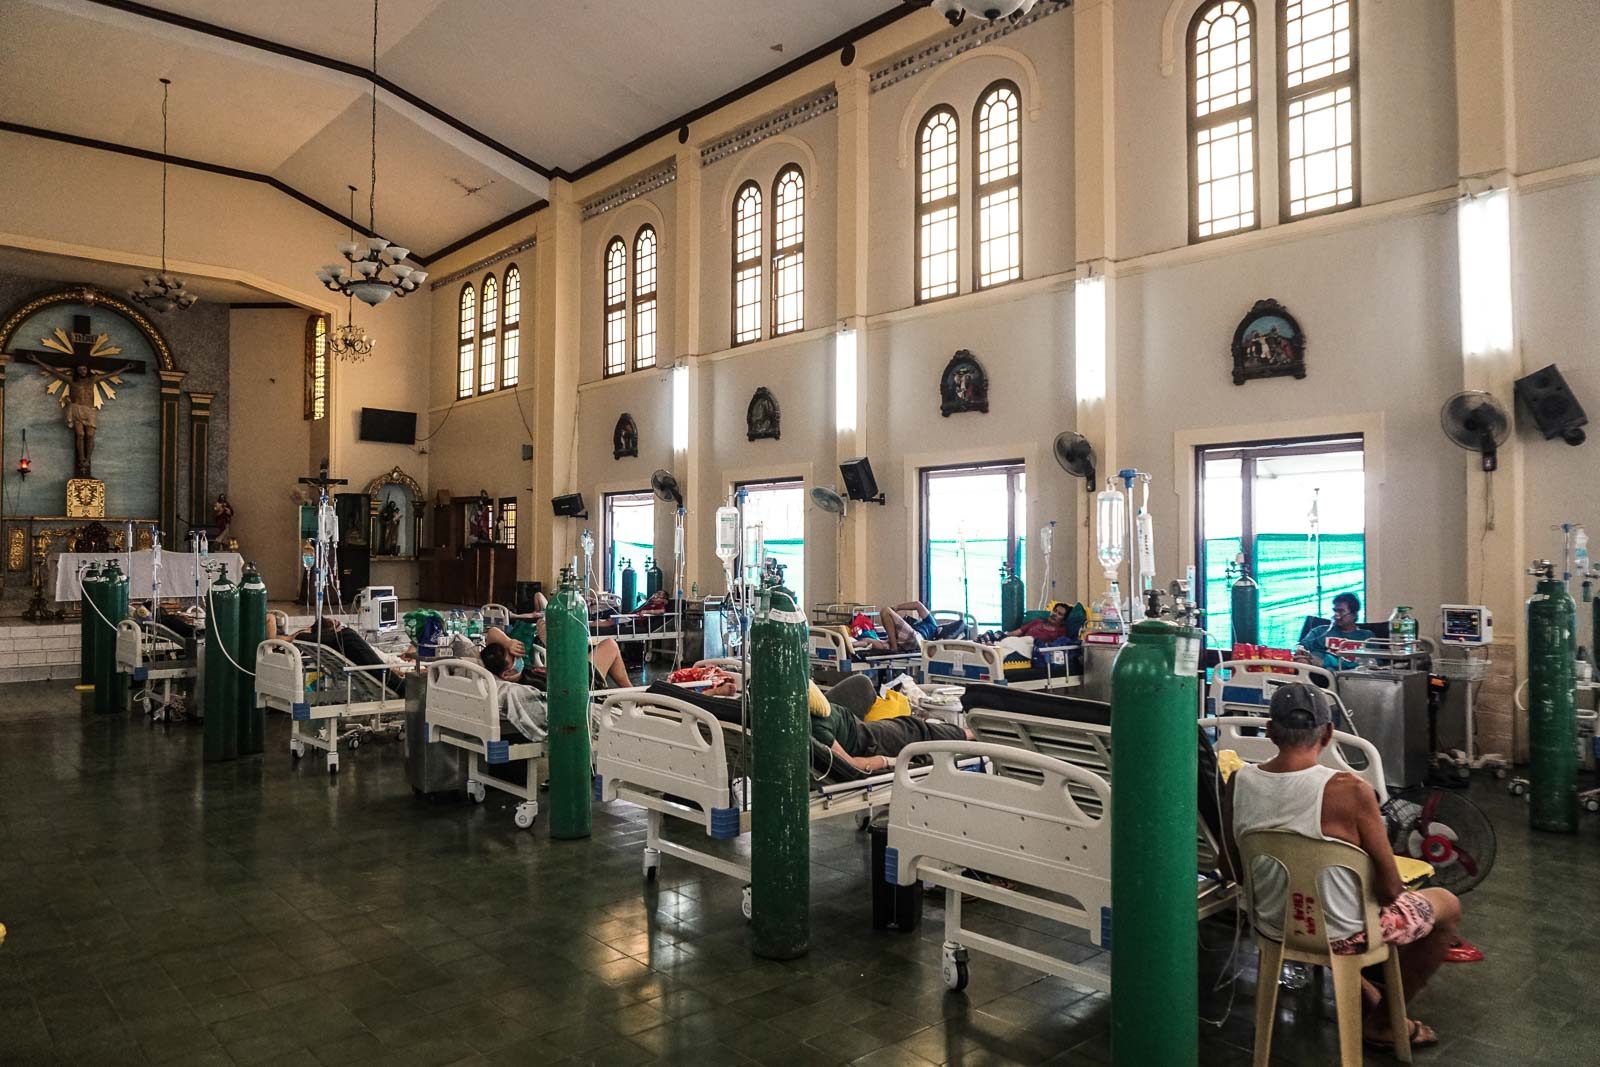 PH records 16,694 new COVID-19 cases, 2nd highest since pandemic began